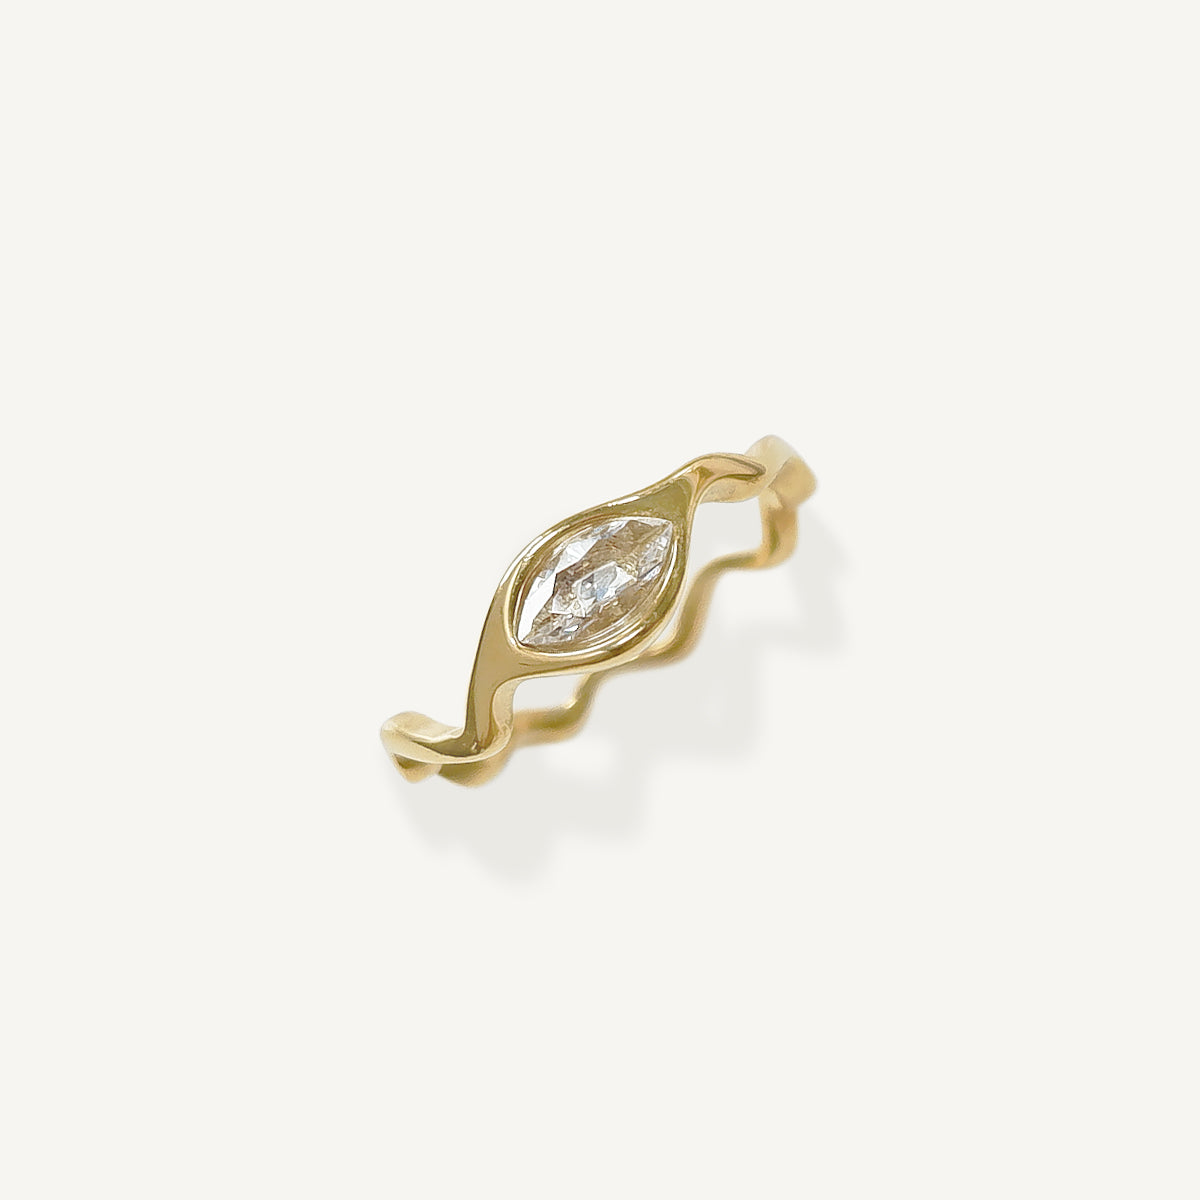 The Marquise Flowy Ring